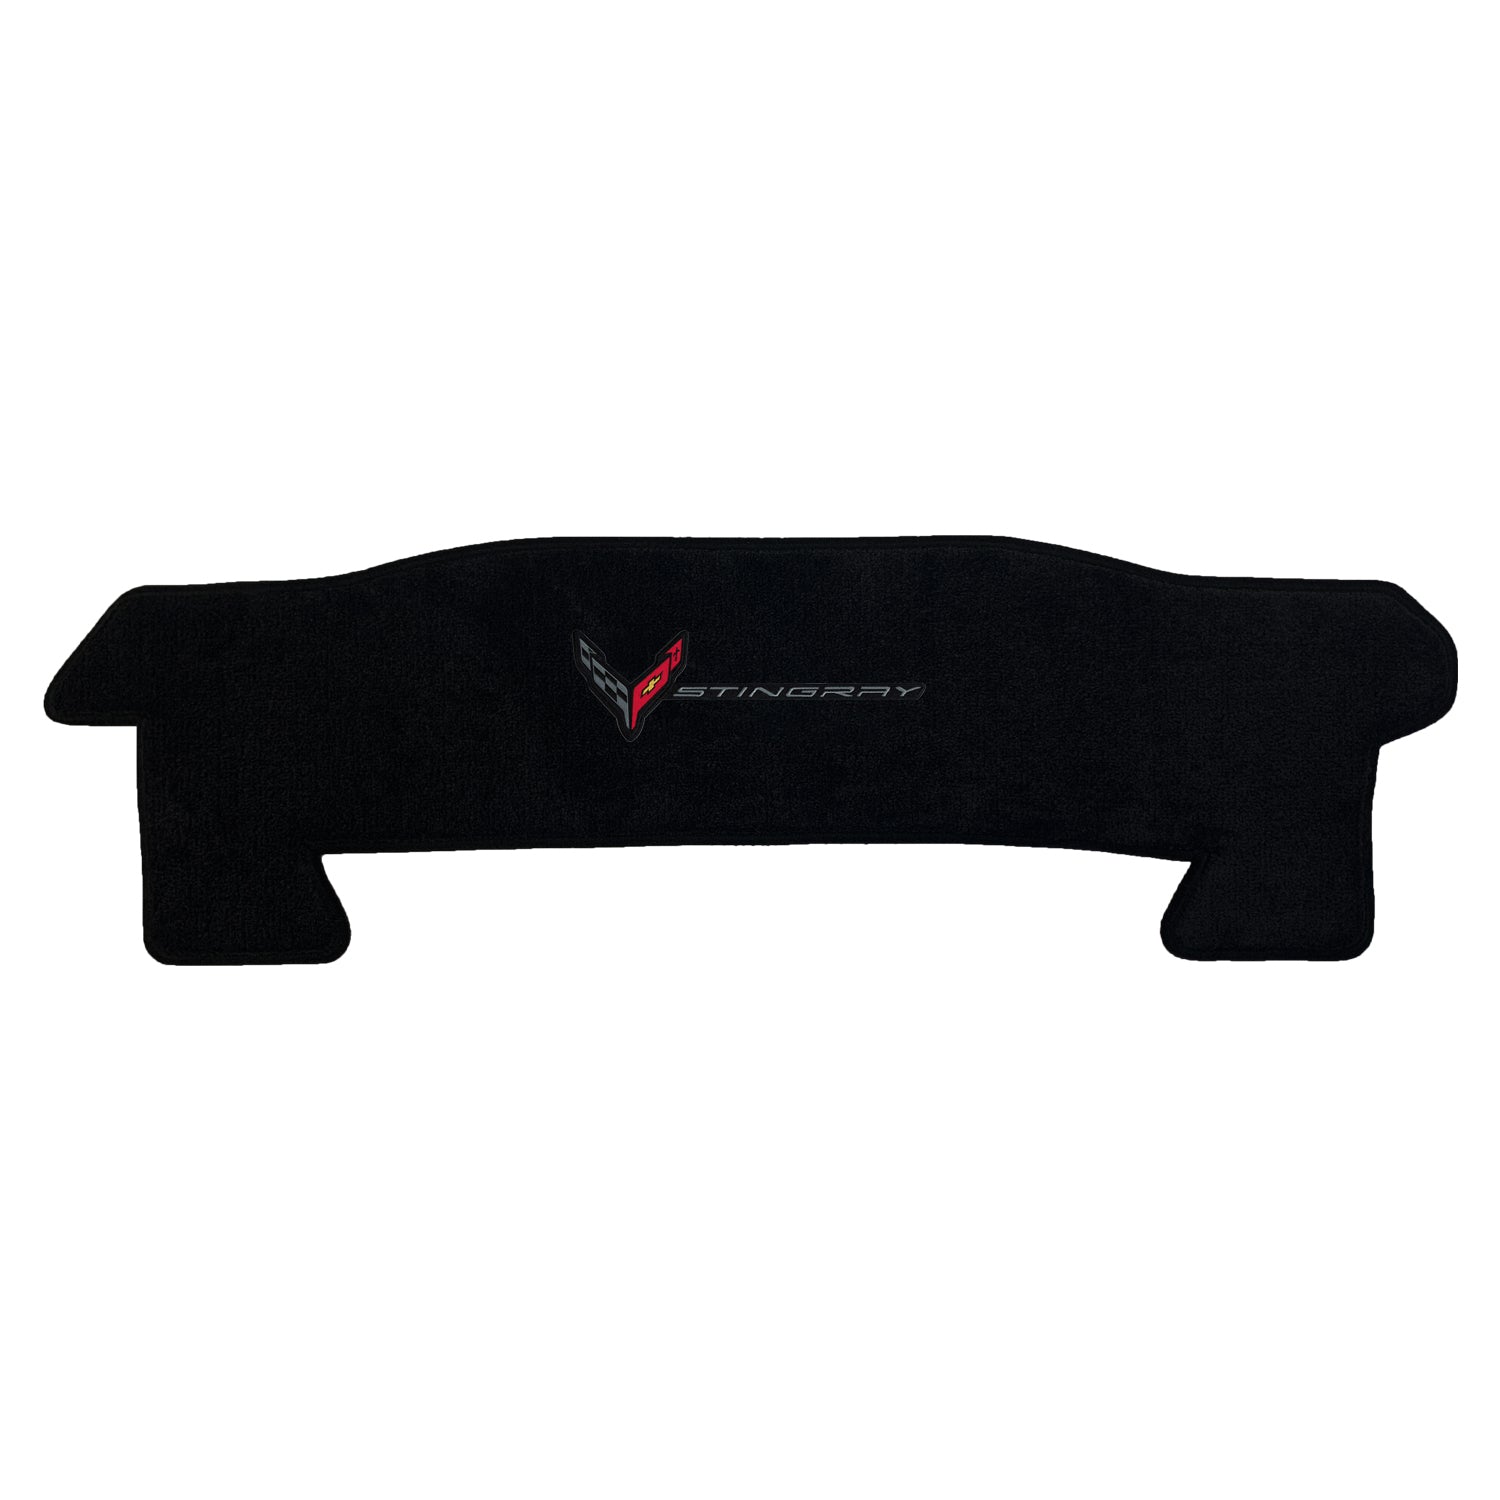 C8 Corvette Rear Cargo Mat - Lloyds Mats With Flags and Stingray Combo : Convertible